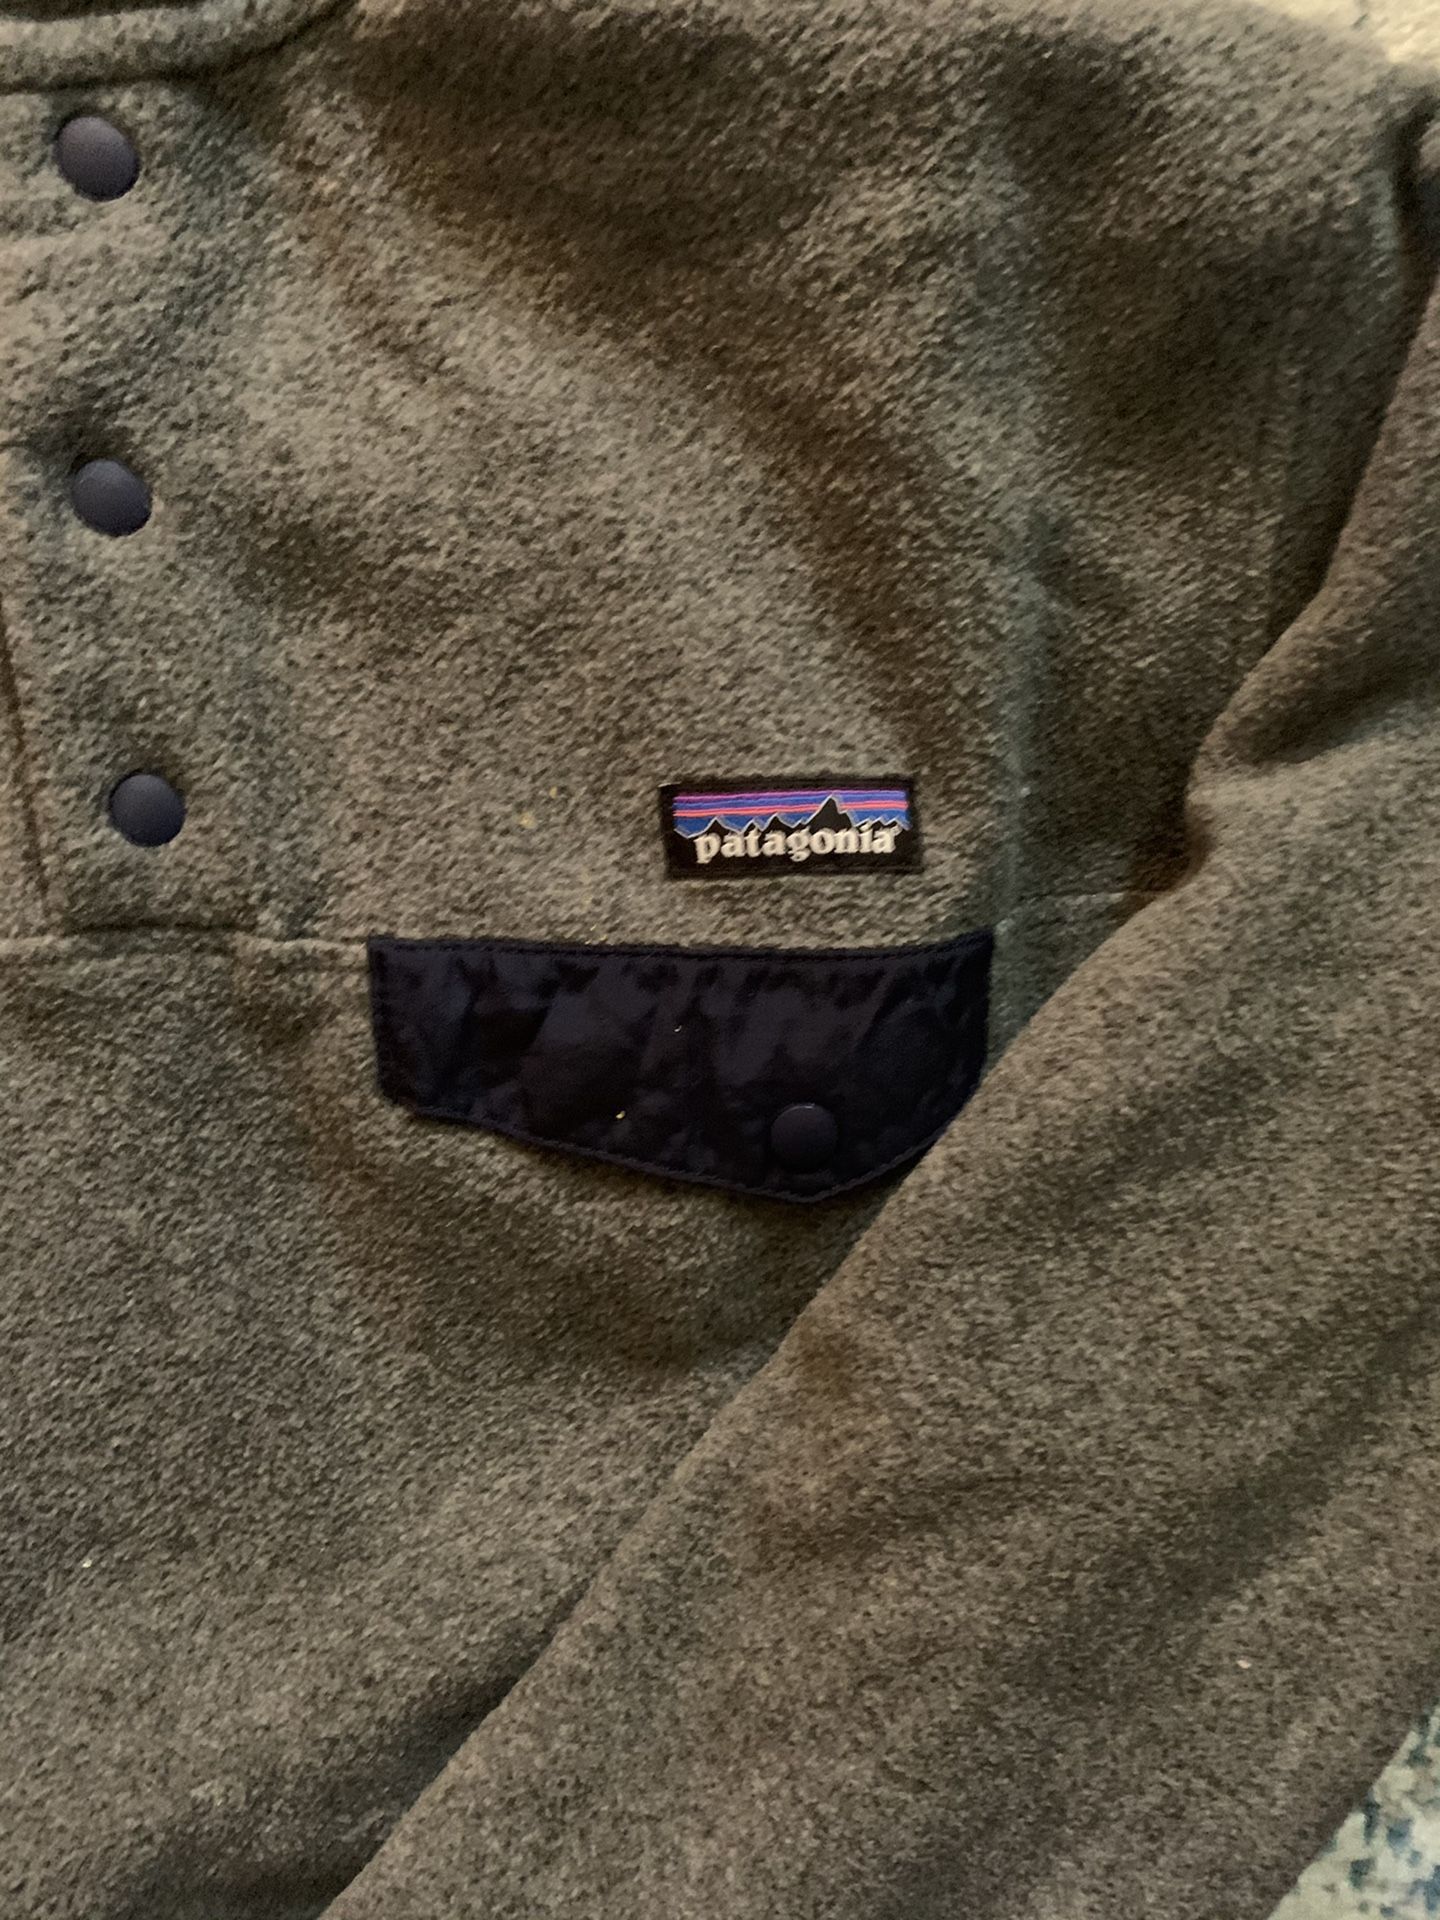 Patagonia pull over